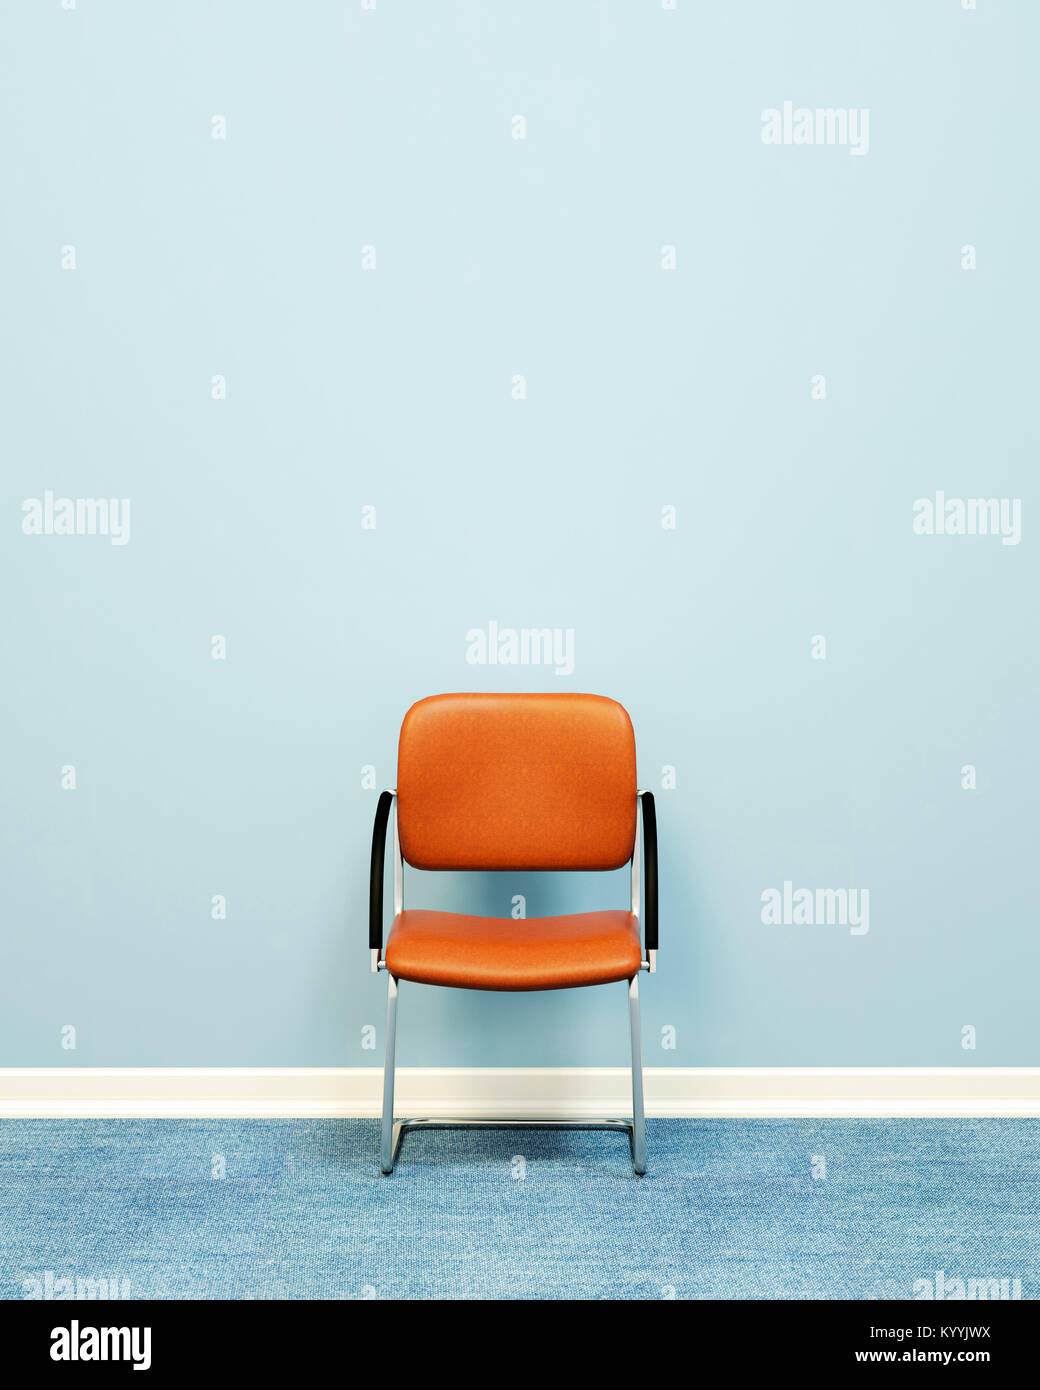 Single chair against a wall in an empty room Stock Photo